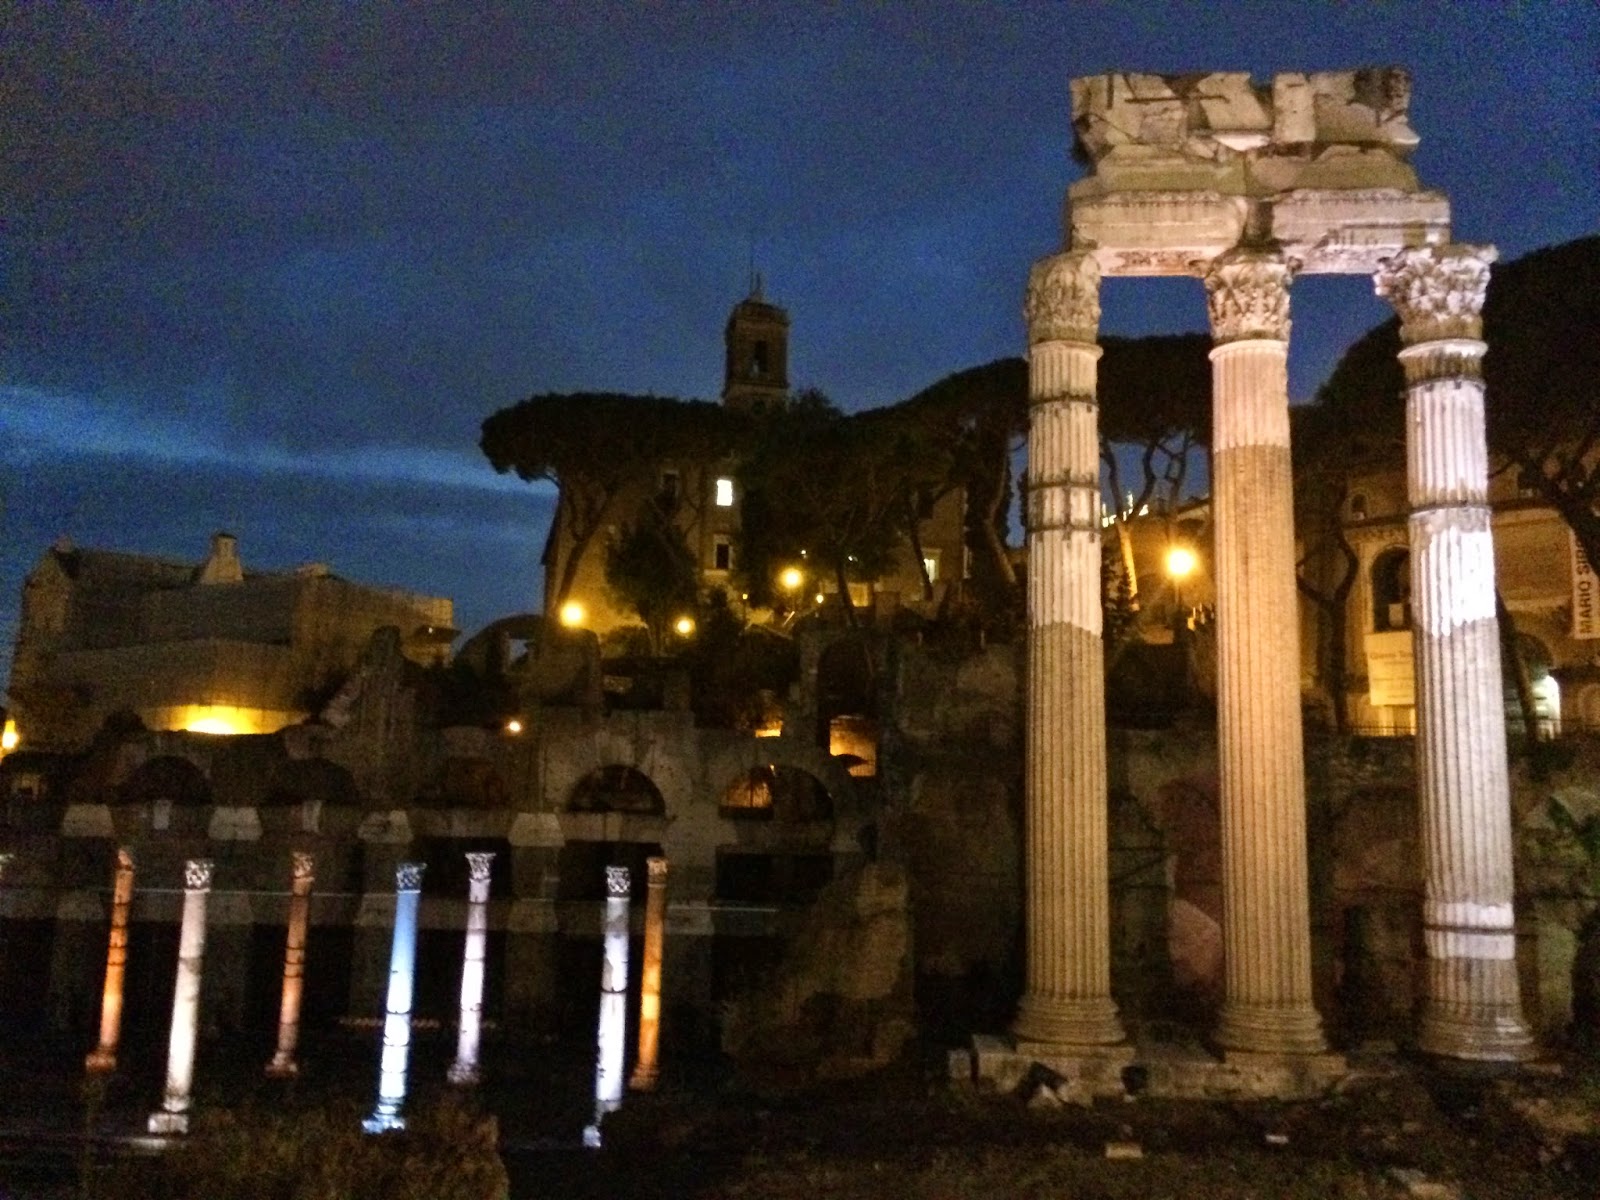 Monuments-At-Night-Roma-5-Things-I-Adore-About-Rome